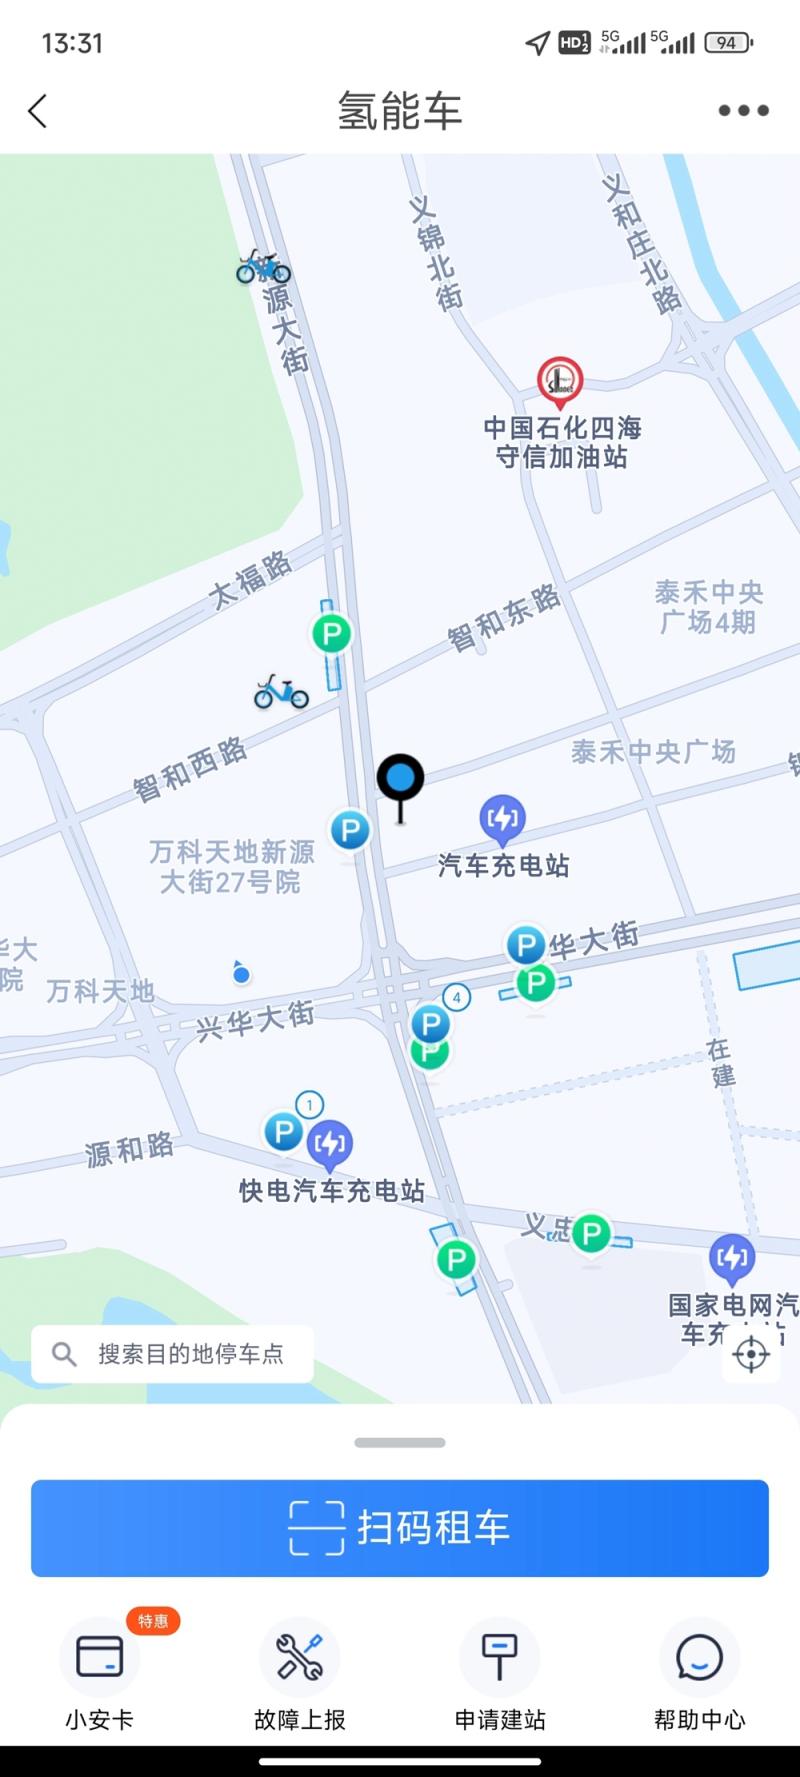 Where has the hydrogen bike gone? Is hydrogen powered bicycles a gimmick?, Over a week of vehicle deployment | Longhu Daxingtian Street | Hydrogen Energy